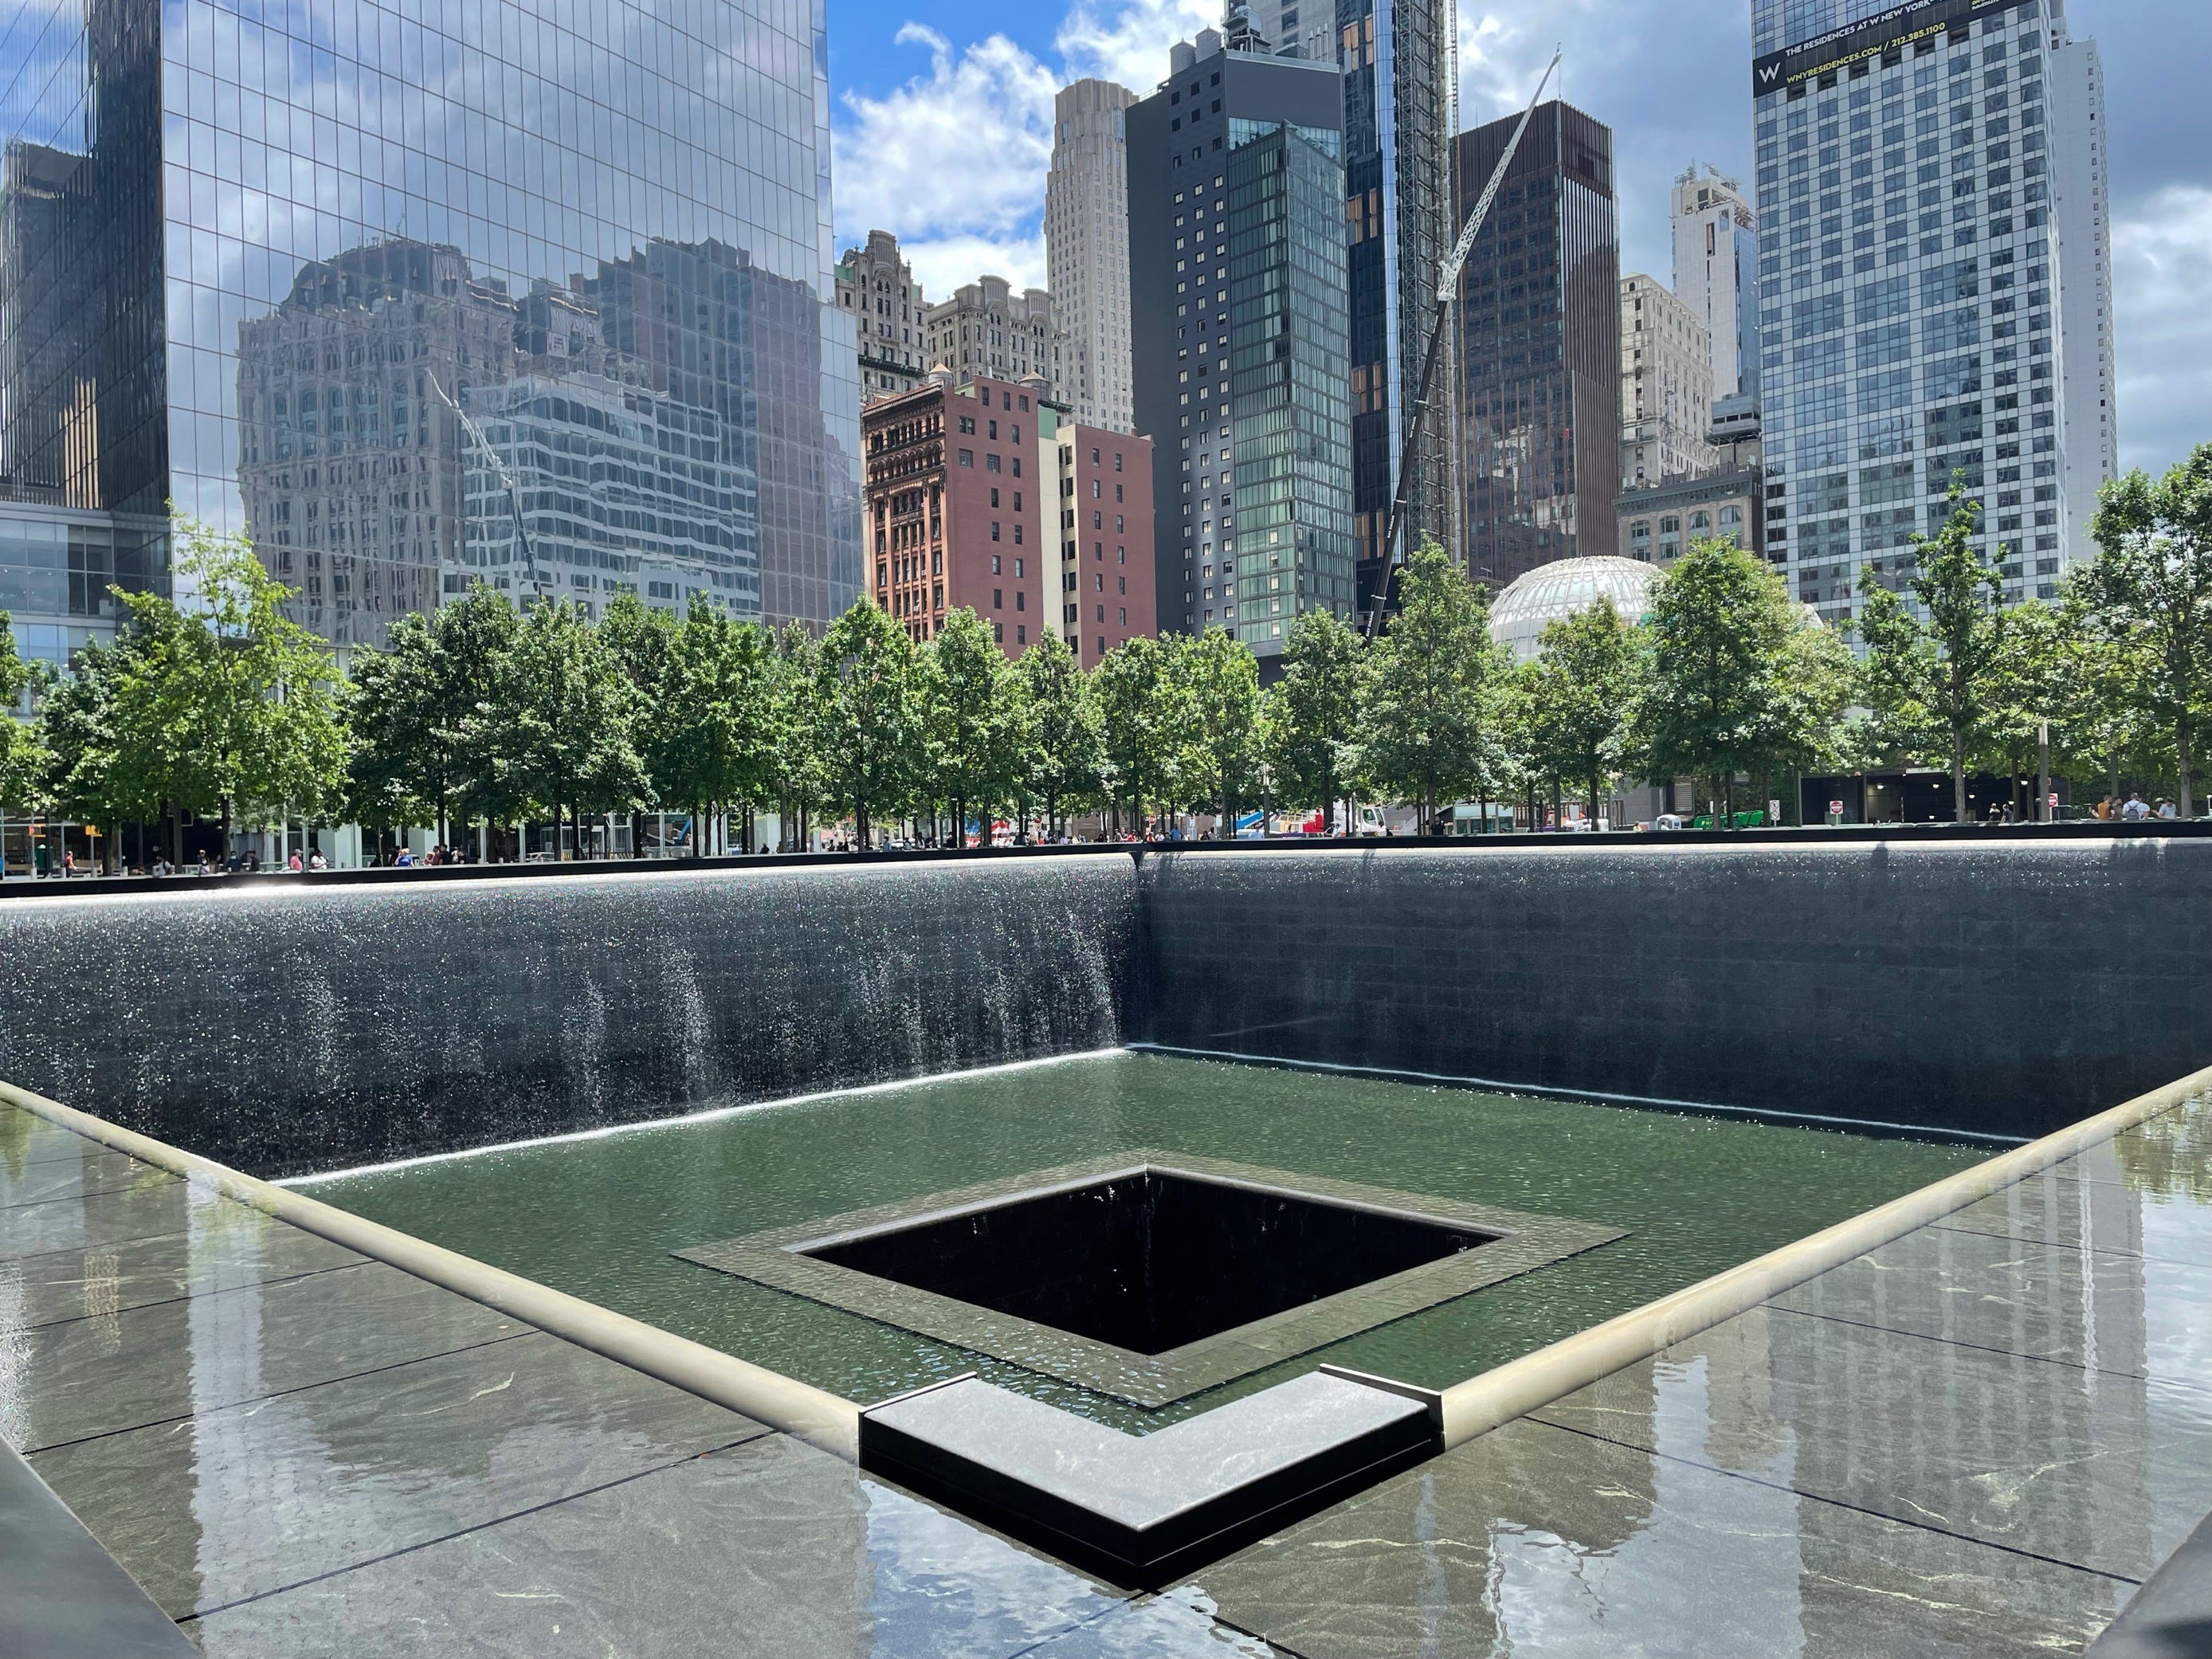 9/11 Leaders and citizens share memories reflections